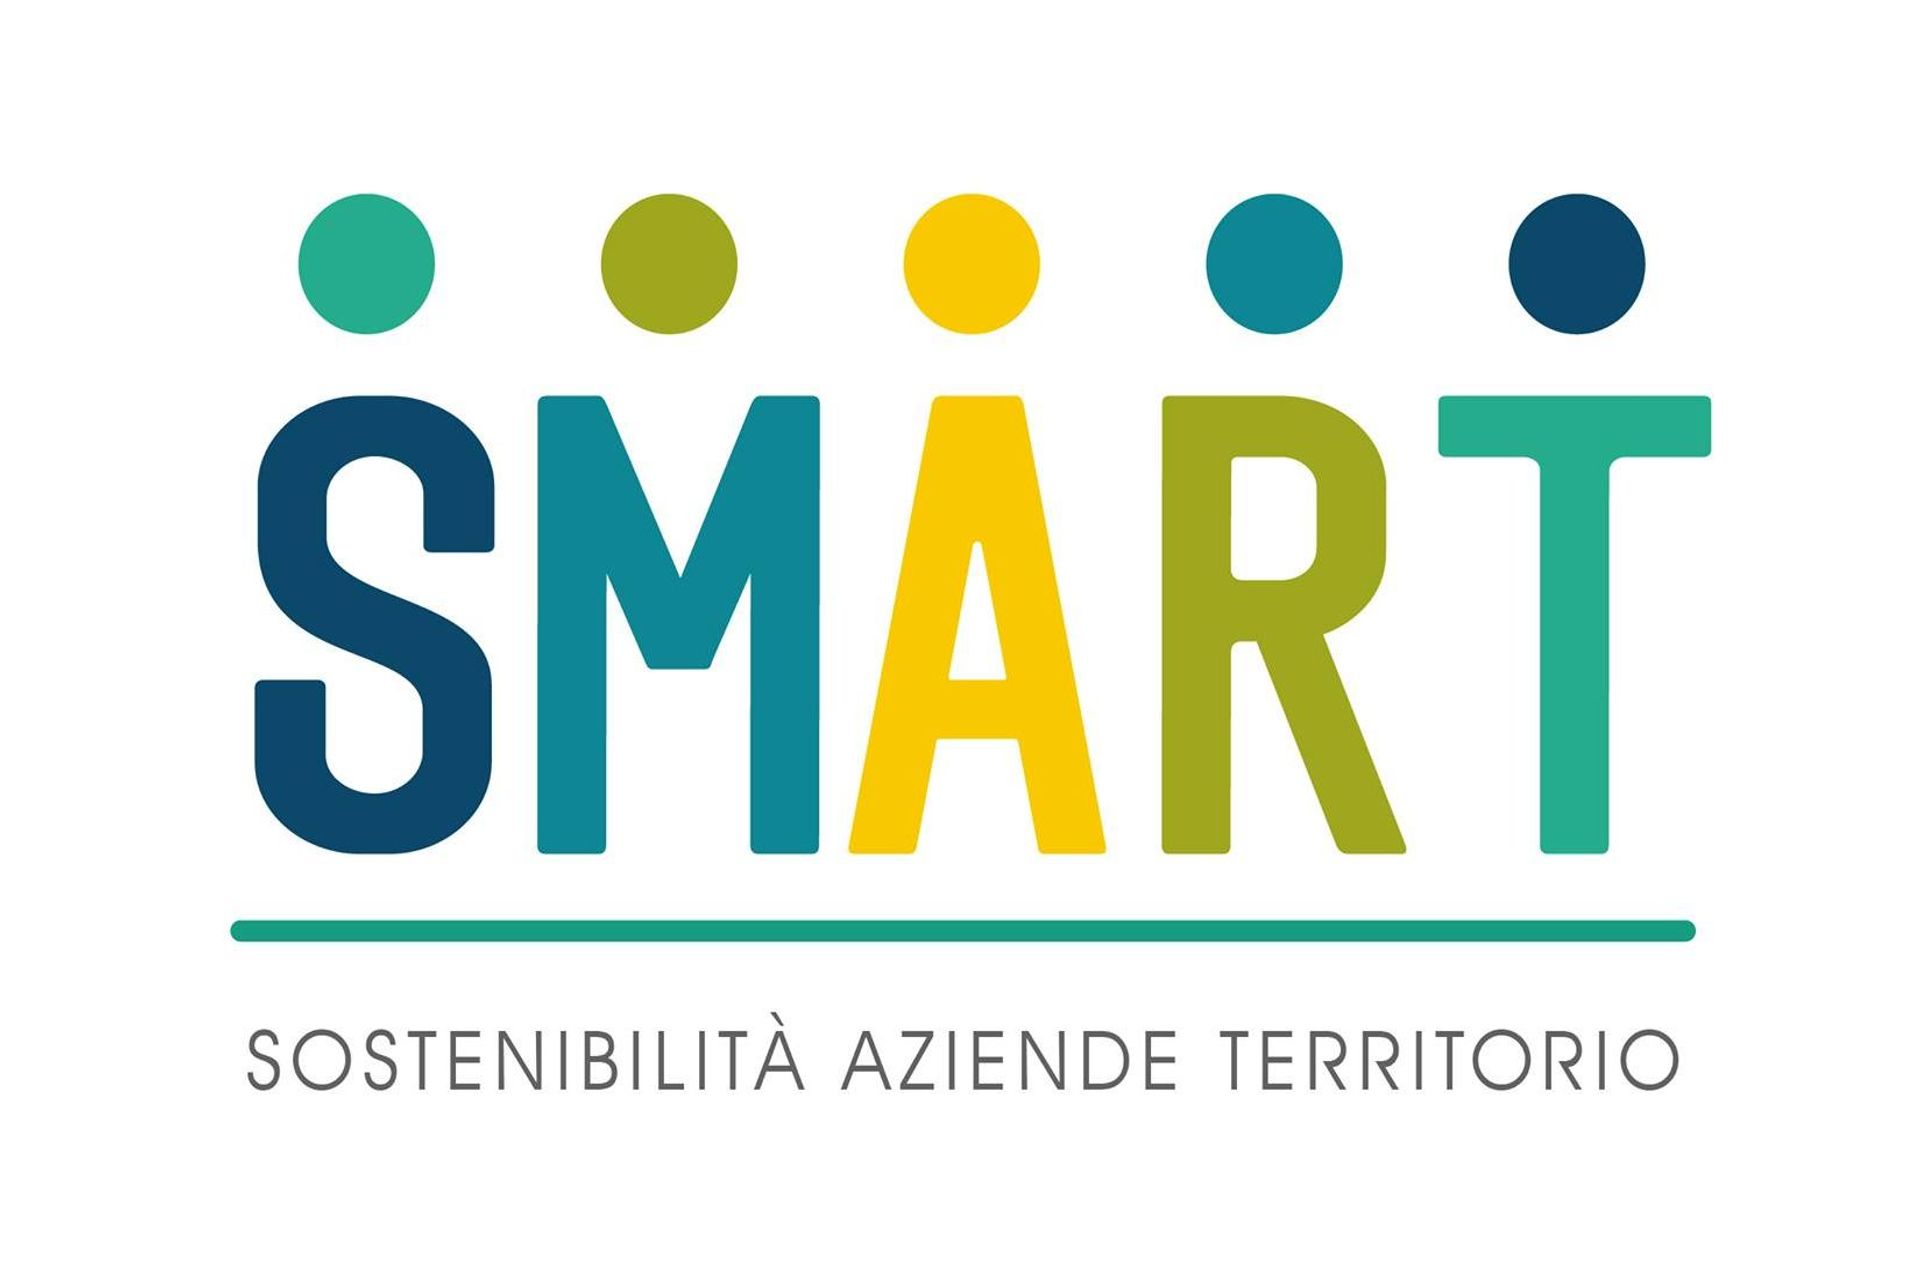 Das Logo des SMART-Projekts (Sustainable Strategies and Responsible Business Models in the Cross-Border Territory)